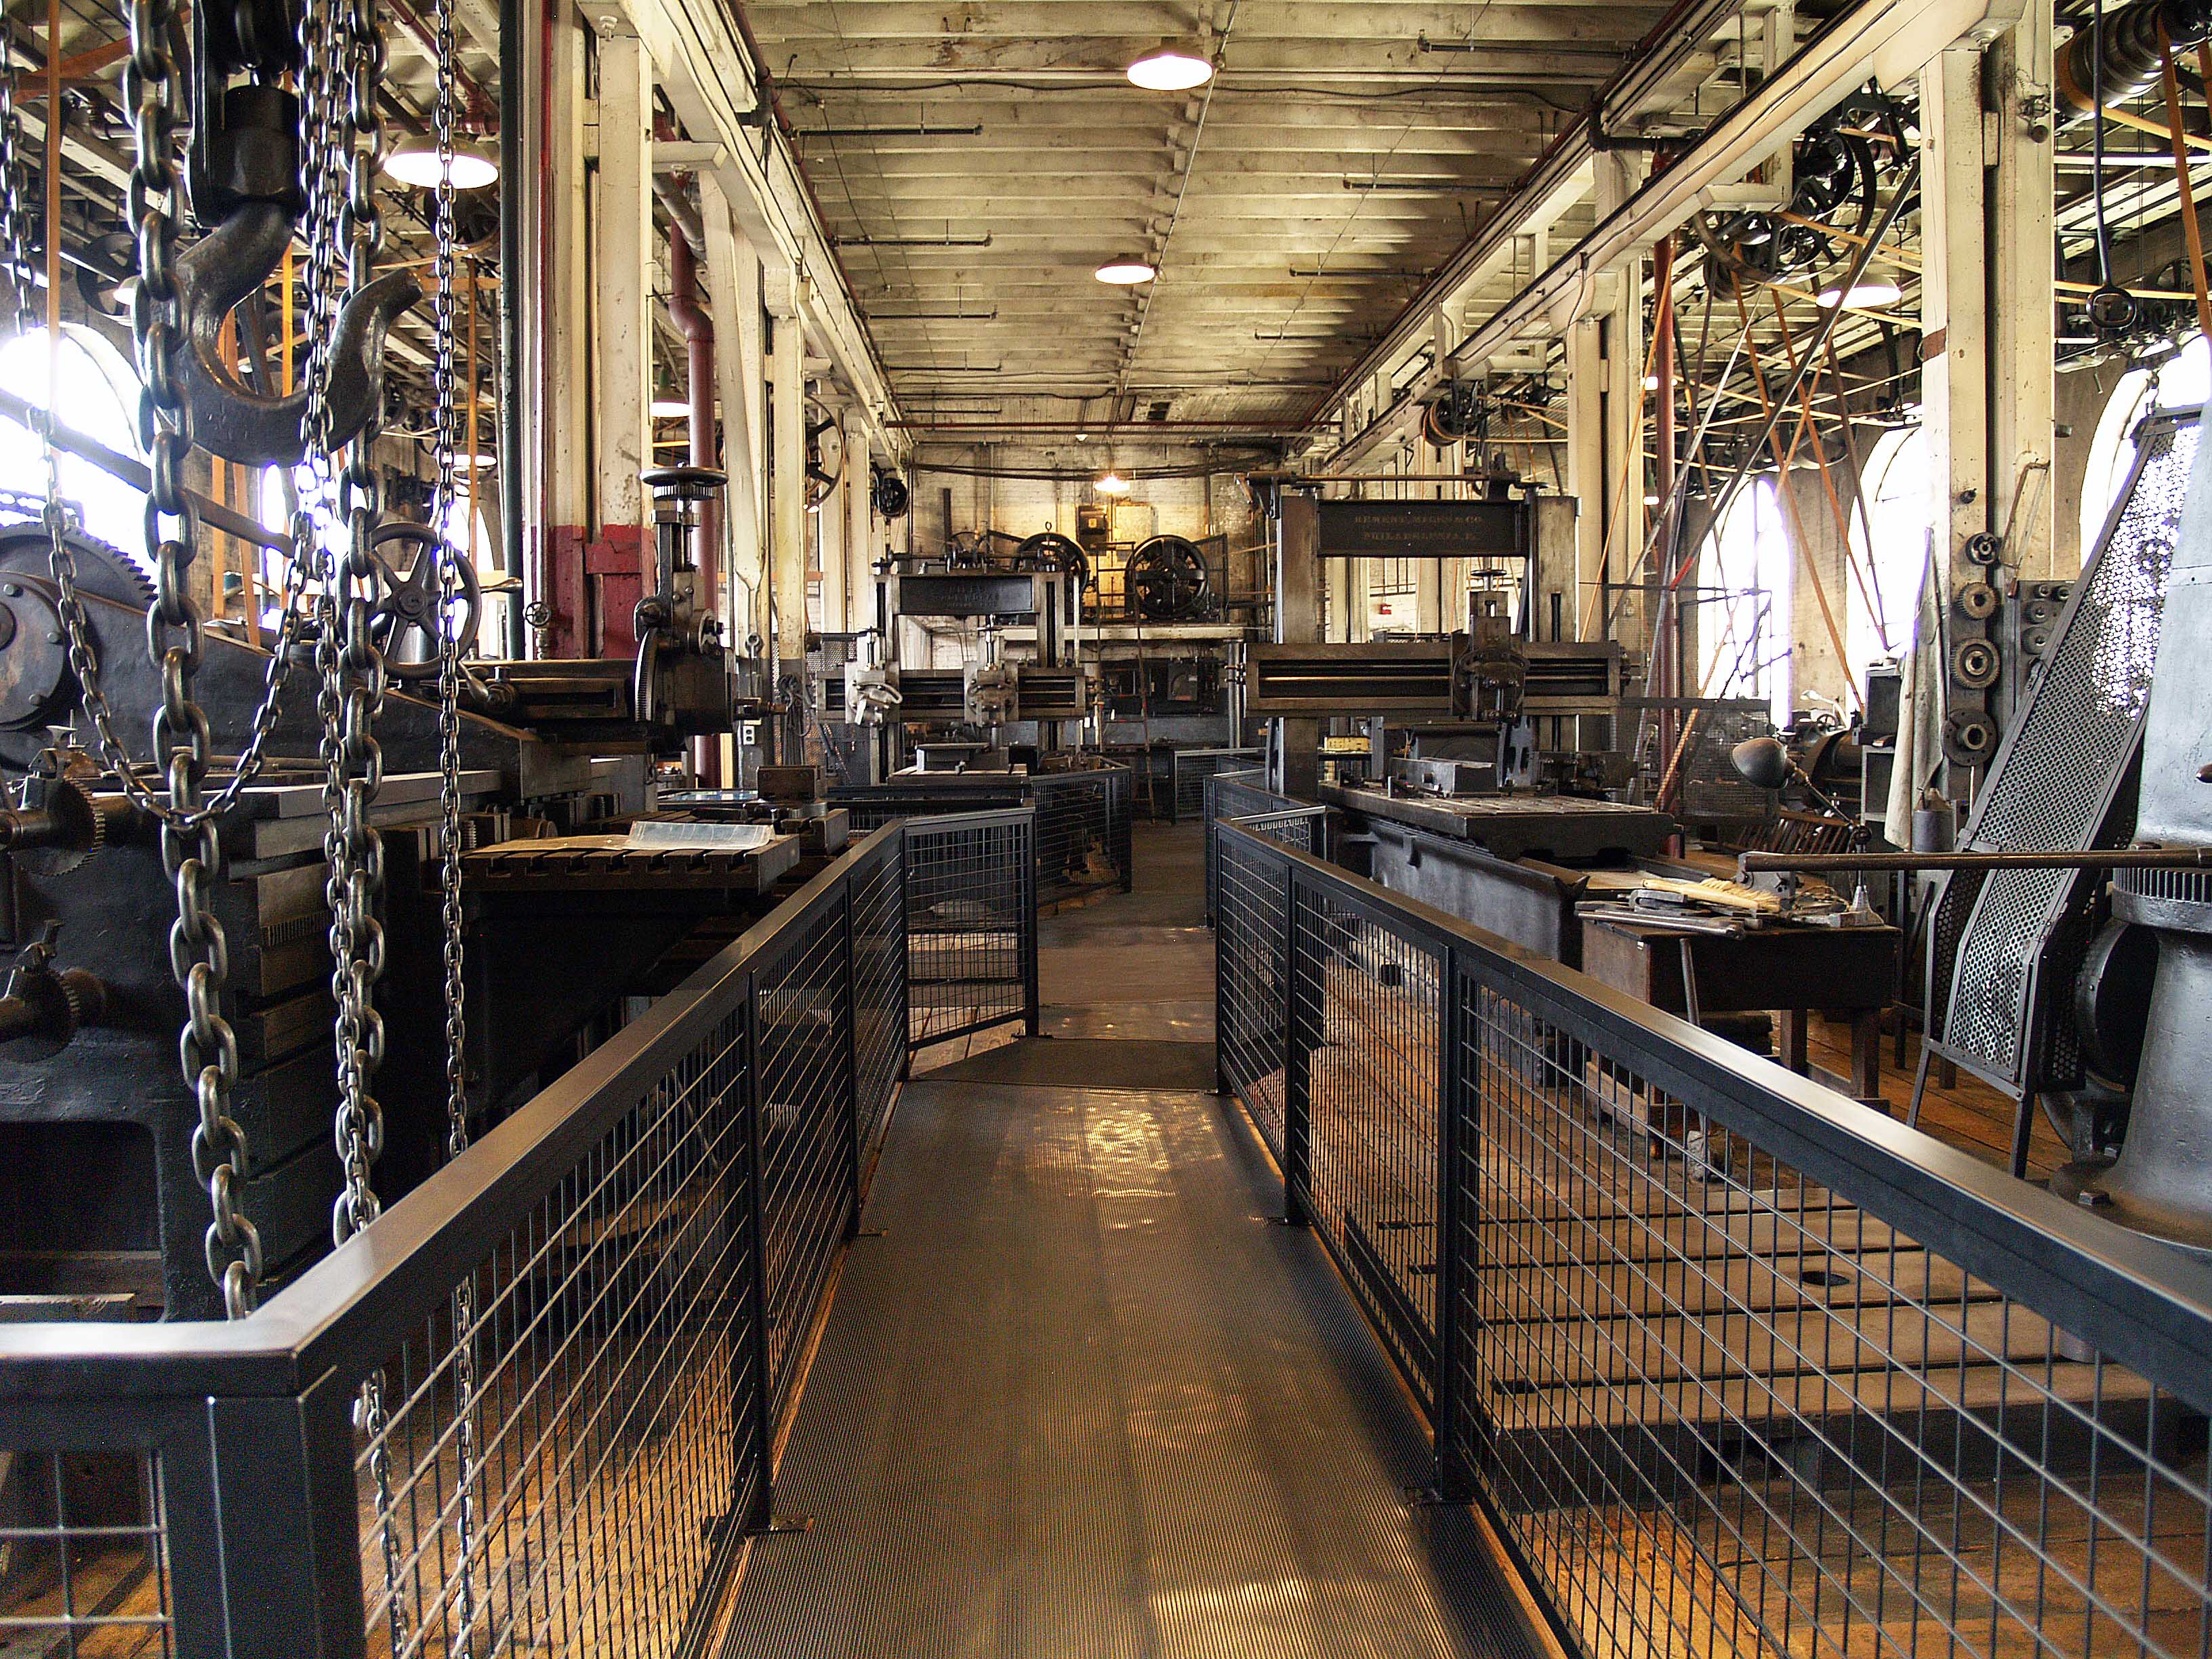 Large work space room with machines connected to belts and pullies